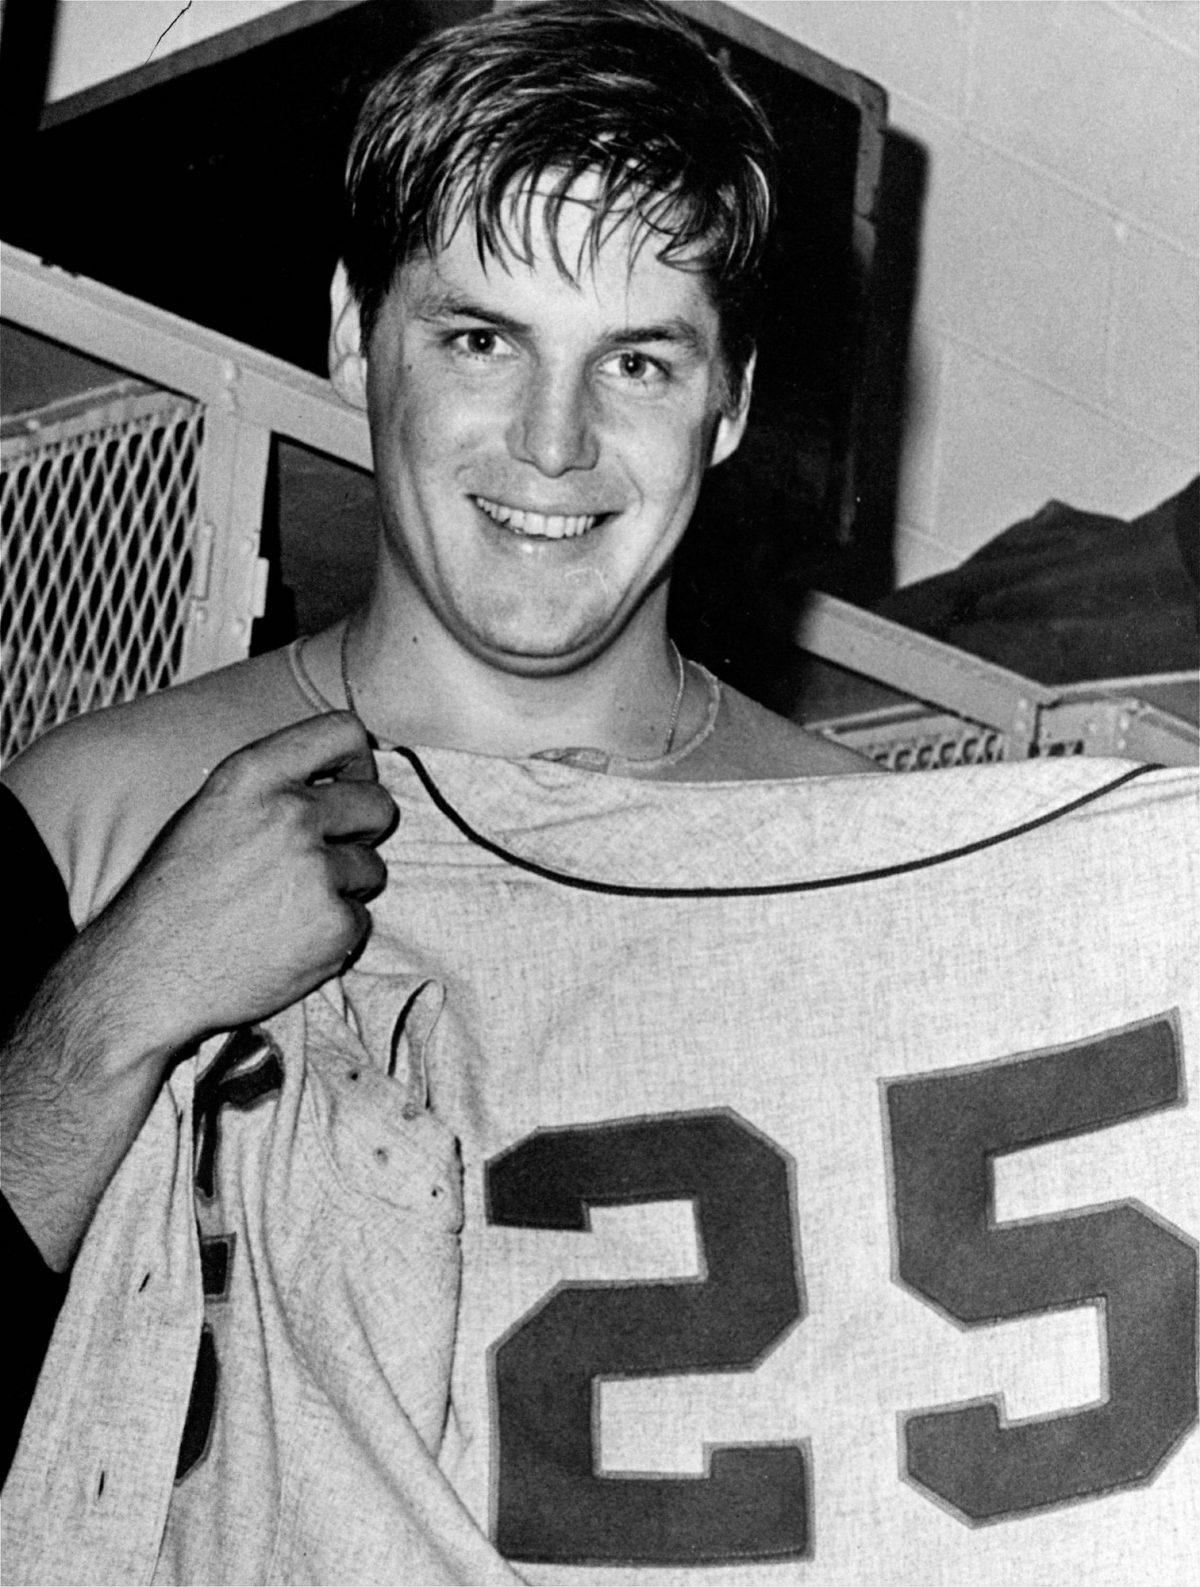 New York Mets pitcher, Tom Seaver holds up a No. 25 Mets' uniform after winning his 25th victory of the year against the Philadelphia Phillies in Philadelphia on Sept. 27, 1969. (AP Photo, File)